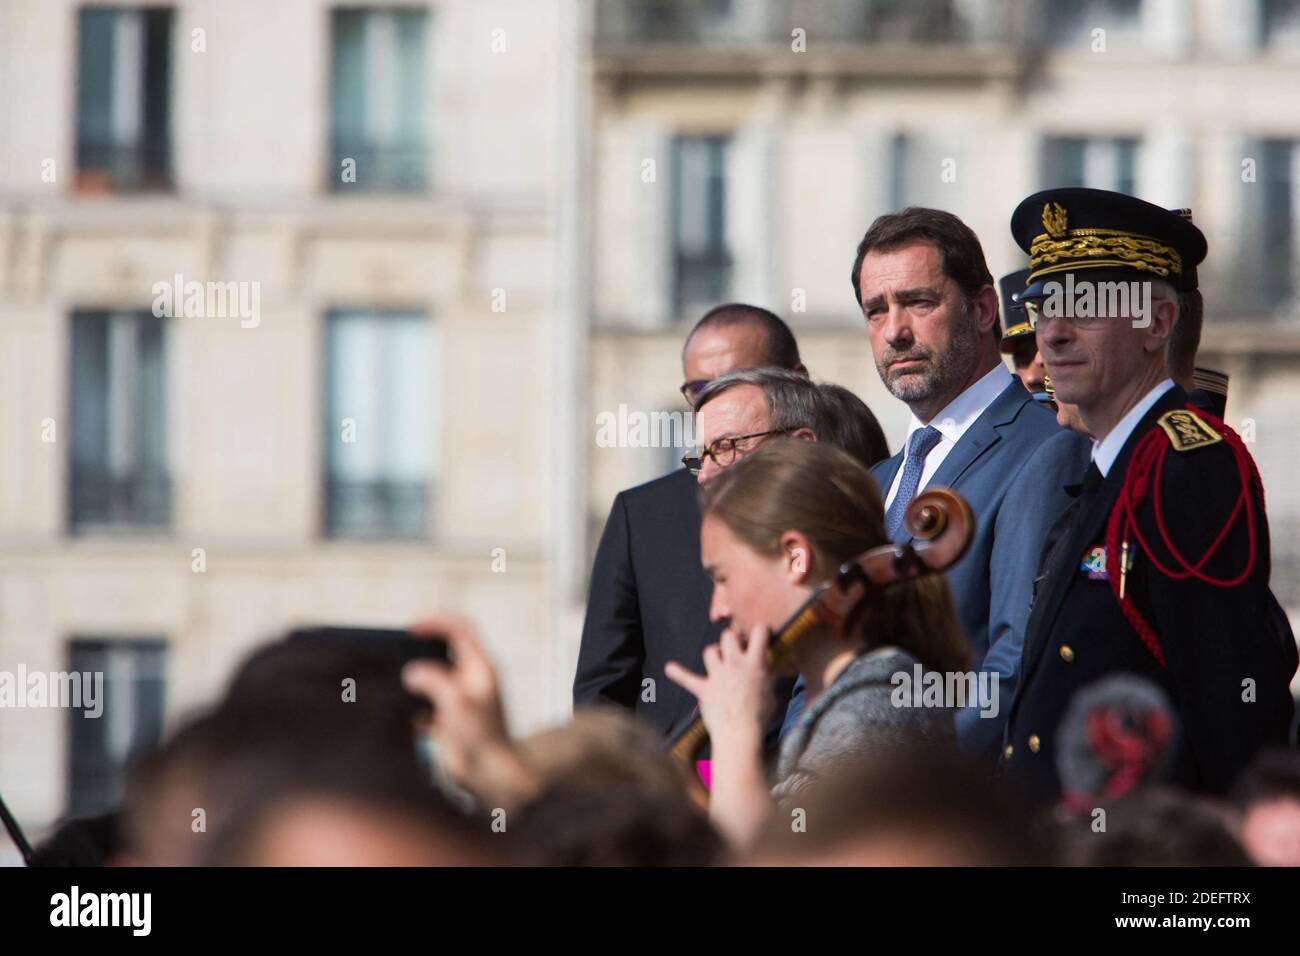 French Interior Minister Christophe Castaner, Paris prefect Didier Lallement, Paris mayor Anne Hidalgo, and other officials walk by Notre Dame cathedral on April 18, 2019 in Paris. France paid a daylong tribute on April 18, 2019 to the Paris firefighters who saved Notre Dame Cathedral from collapse, while construction workers rushed to secure an area above one of the church's famed rose-shaped windows and other vulnerable sections of the fire-damaged landmark. Photo by Raphael Lafargue/ABACAPRESS.COM Stock Photo